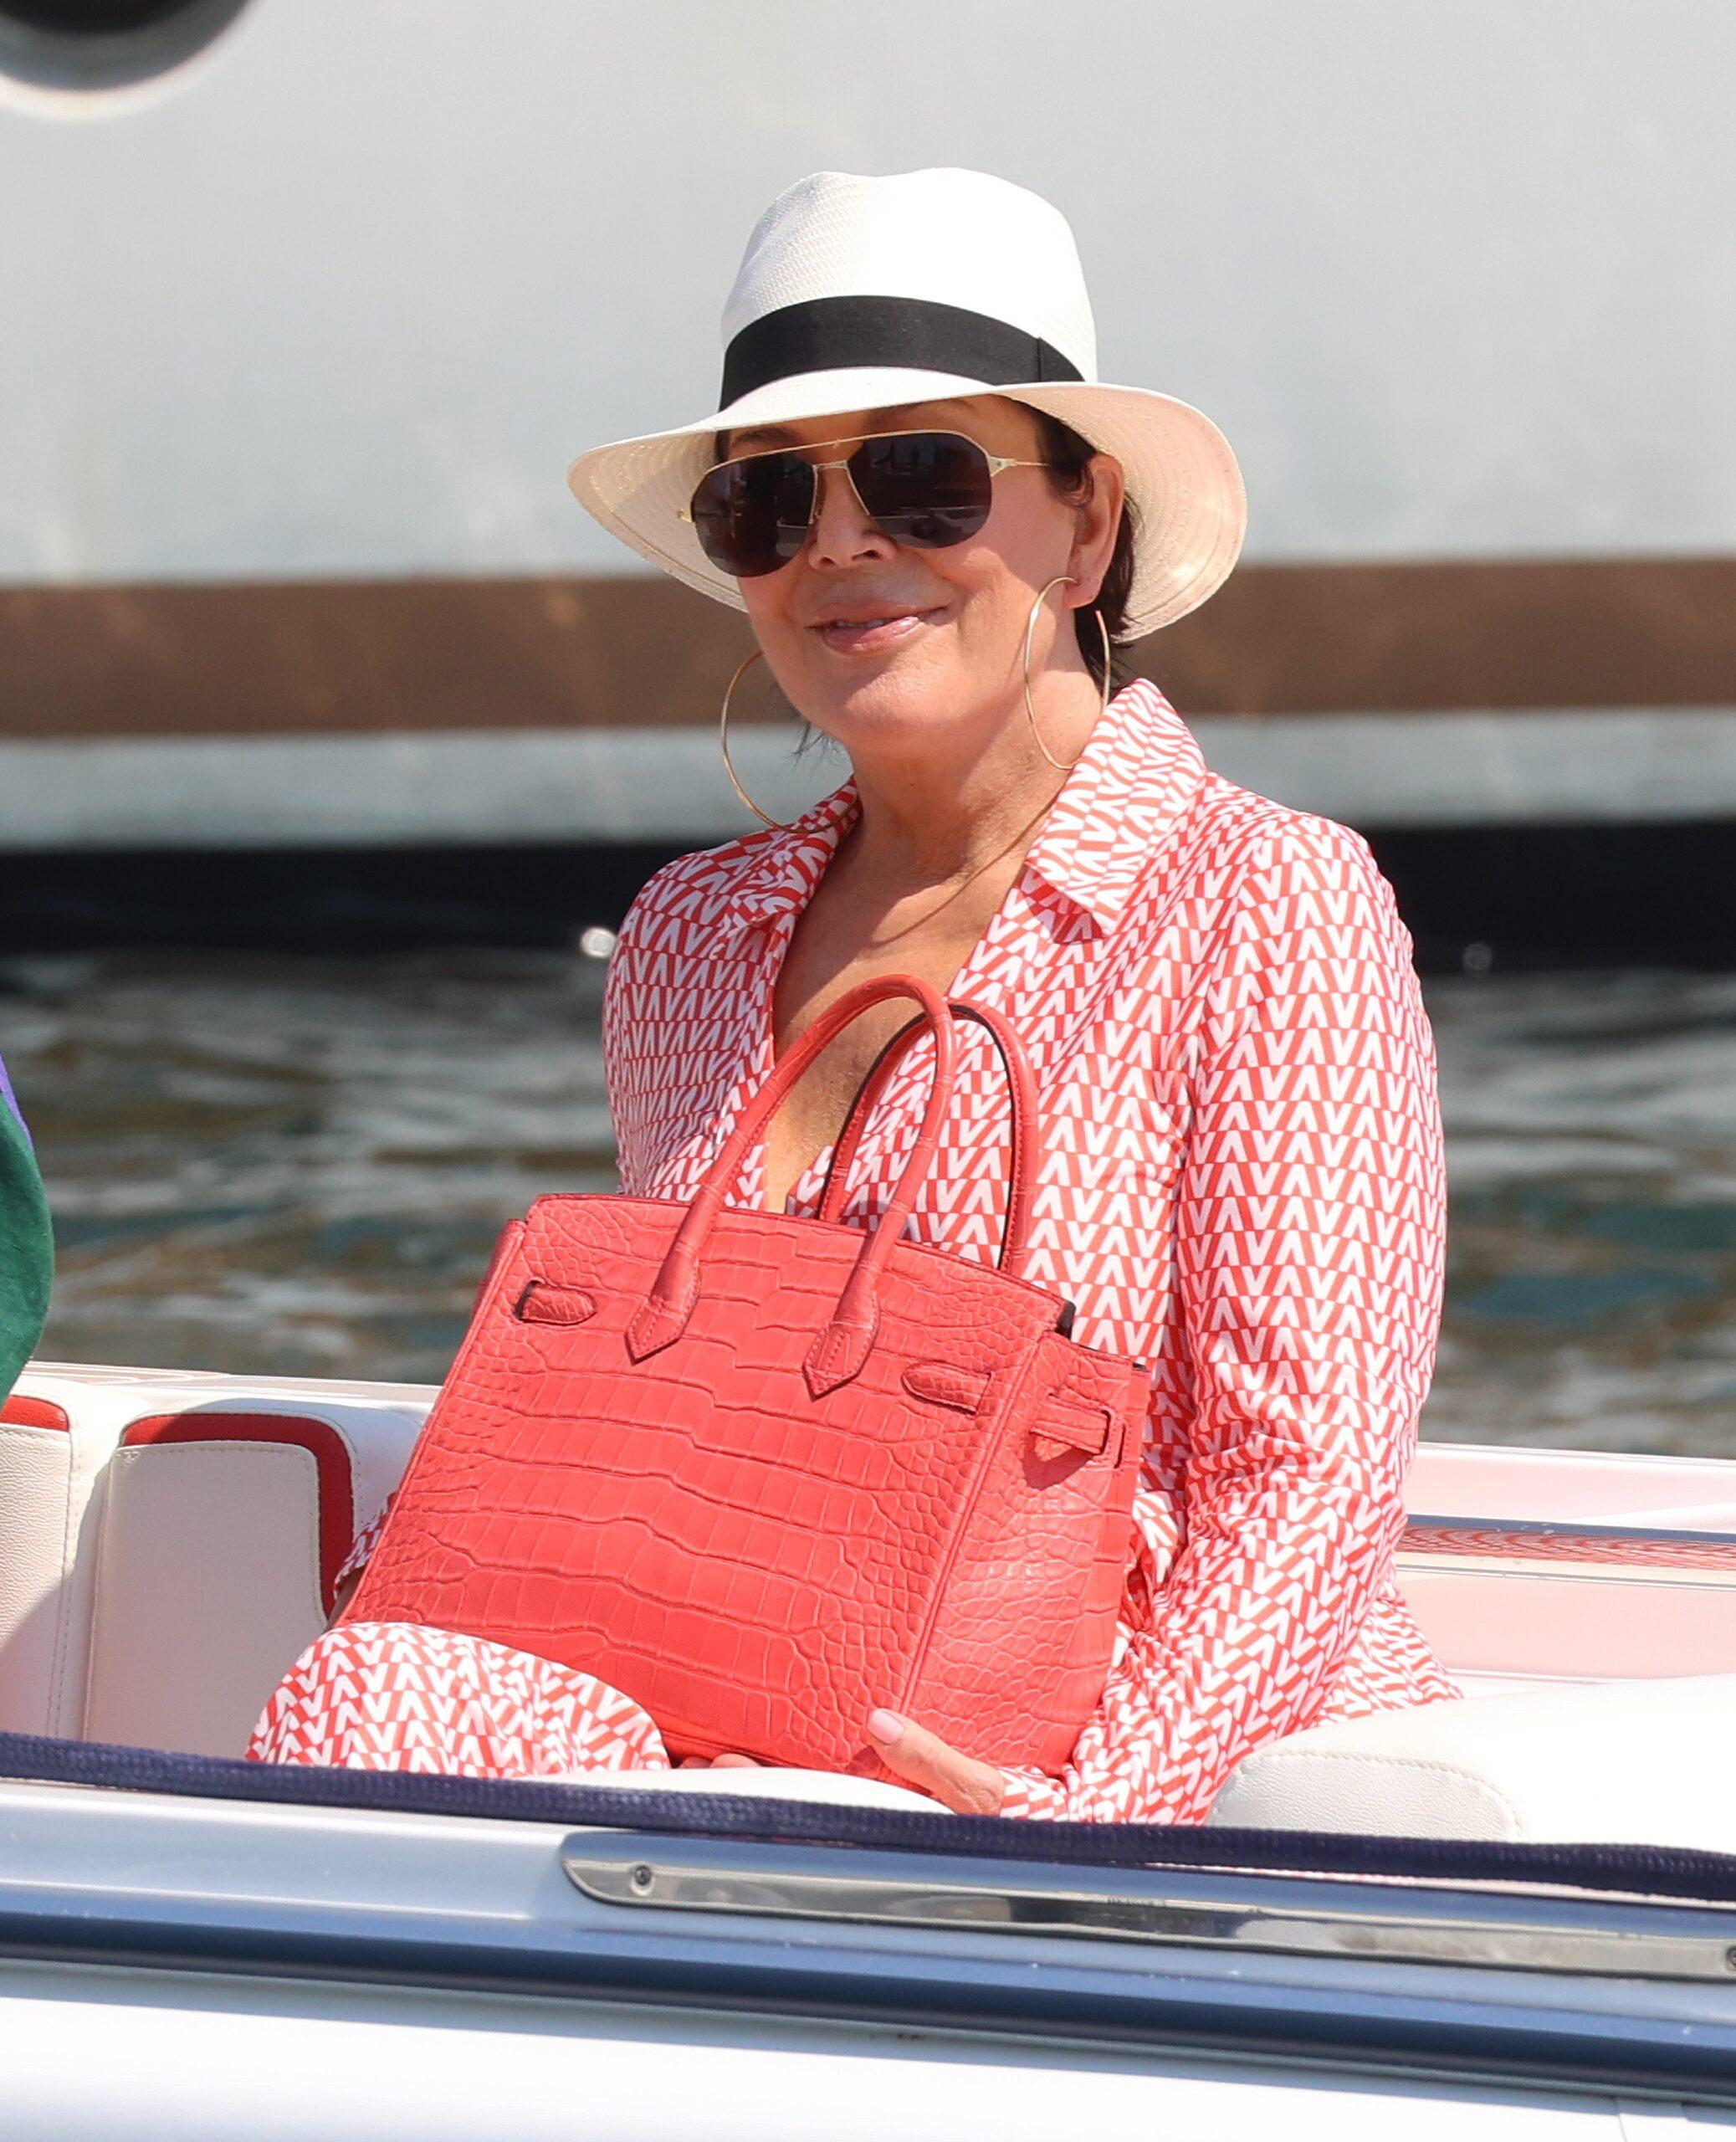 Kris jenner and LeAnn Rimes are seen together while on vacation in St tropez